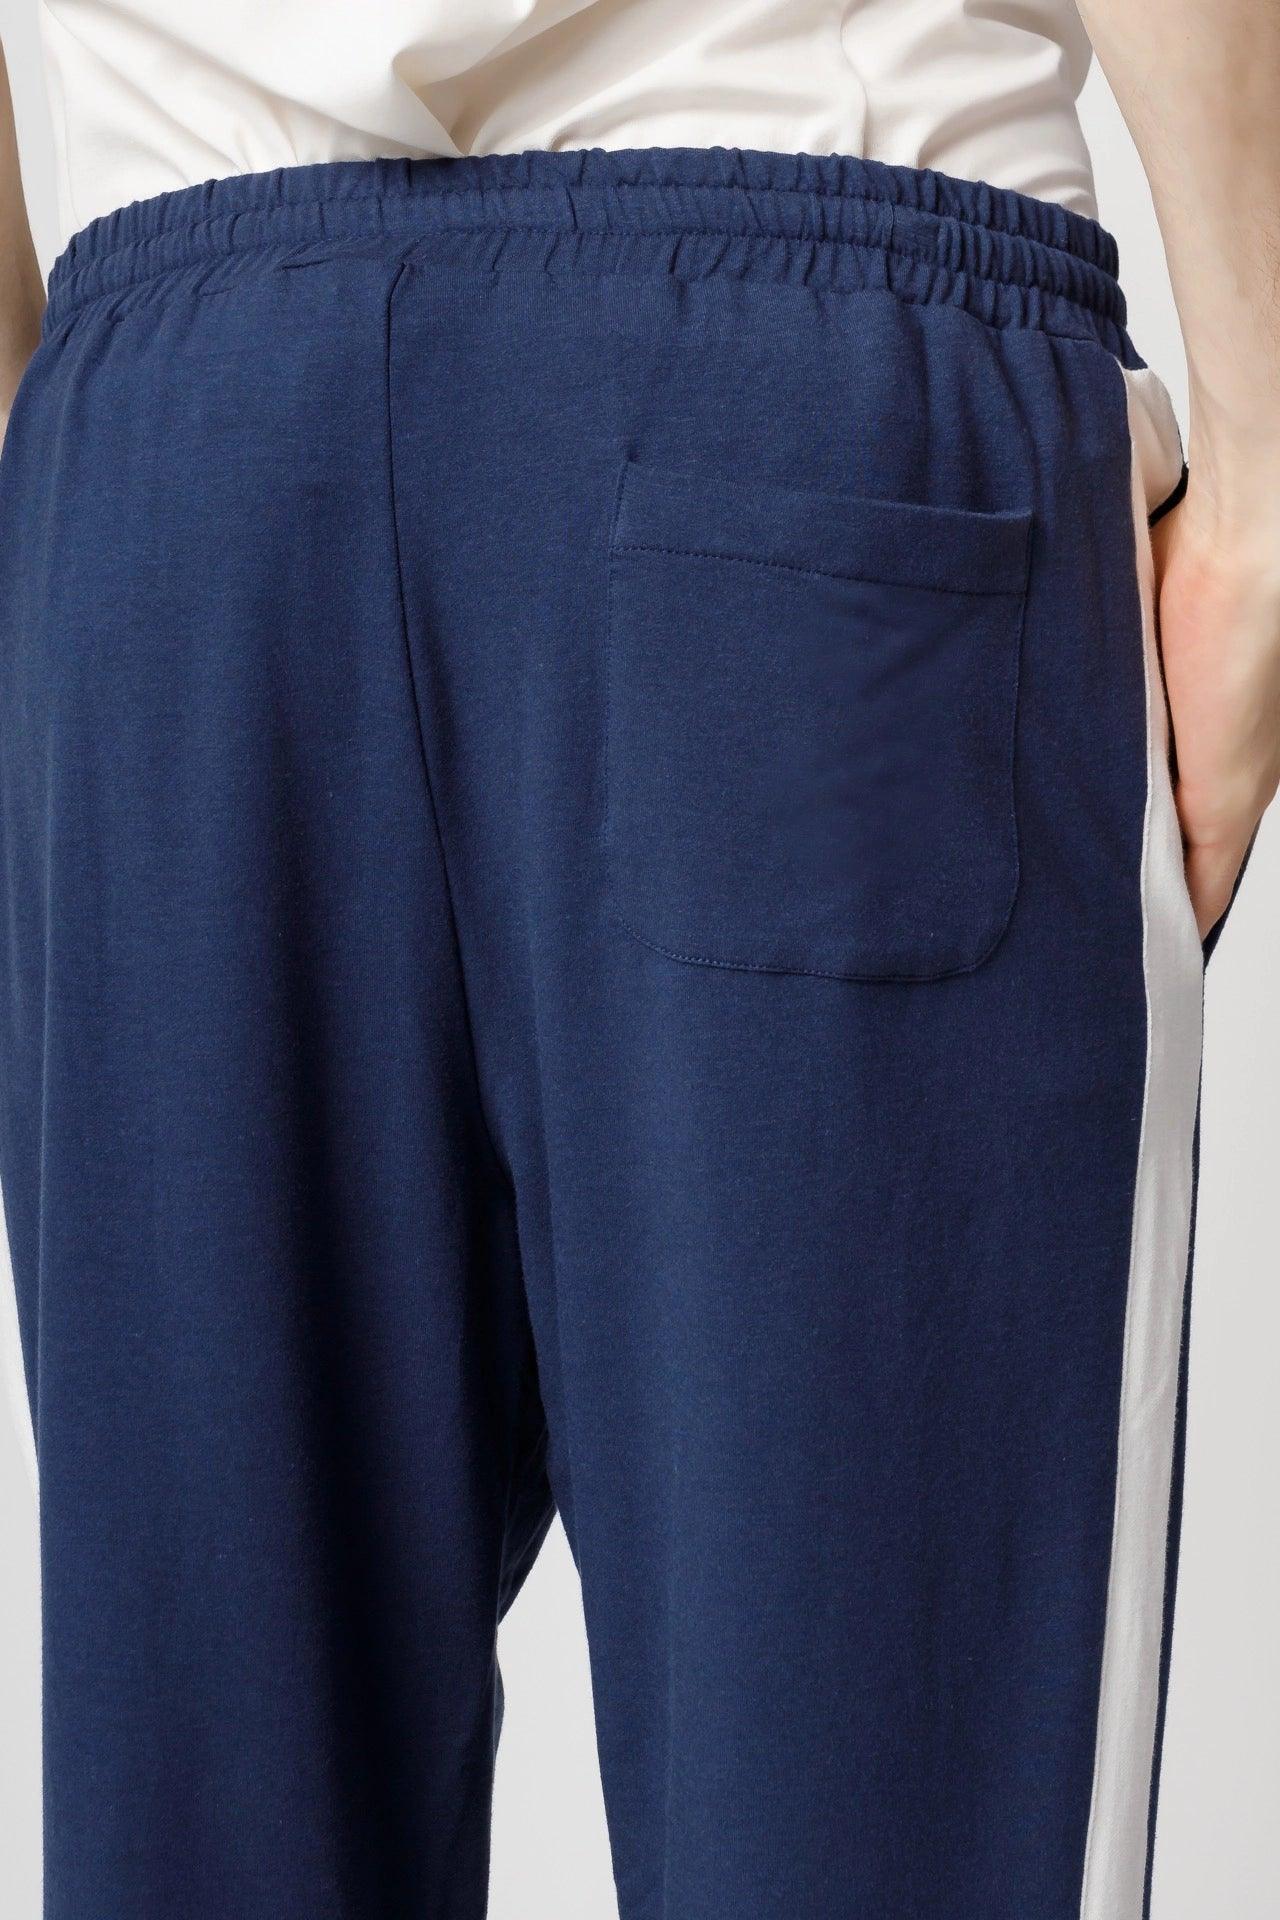 Men&#39;s Side Lined Bamboo Sweats - NOT LABELED